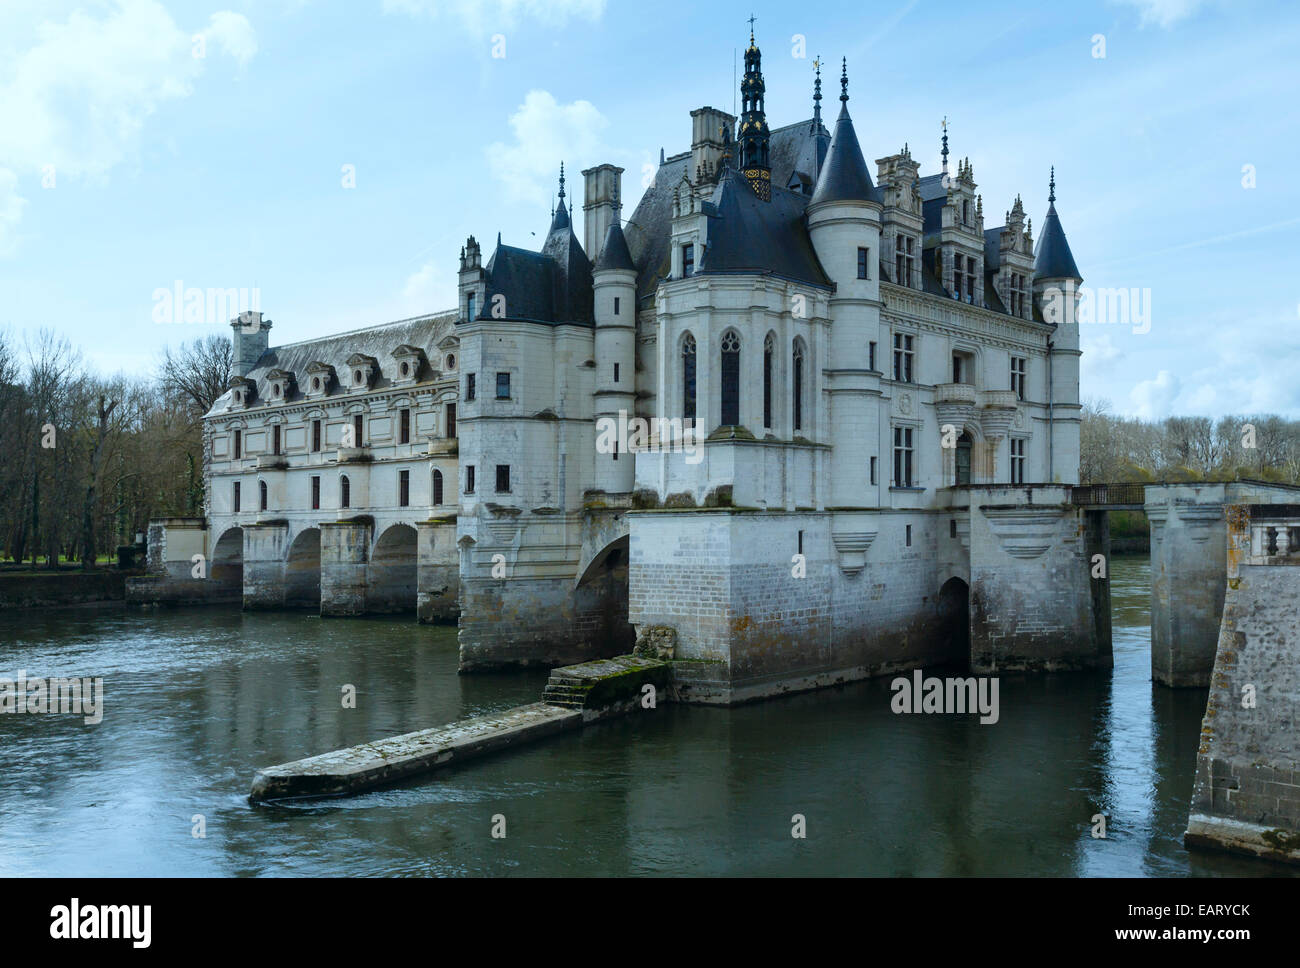 Castle Chenonceau on the River Cher (France). Built in 1514-1522. The ...